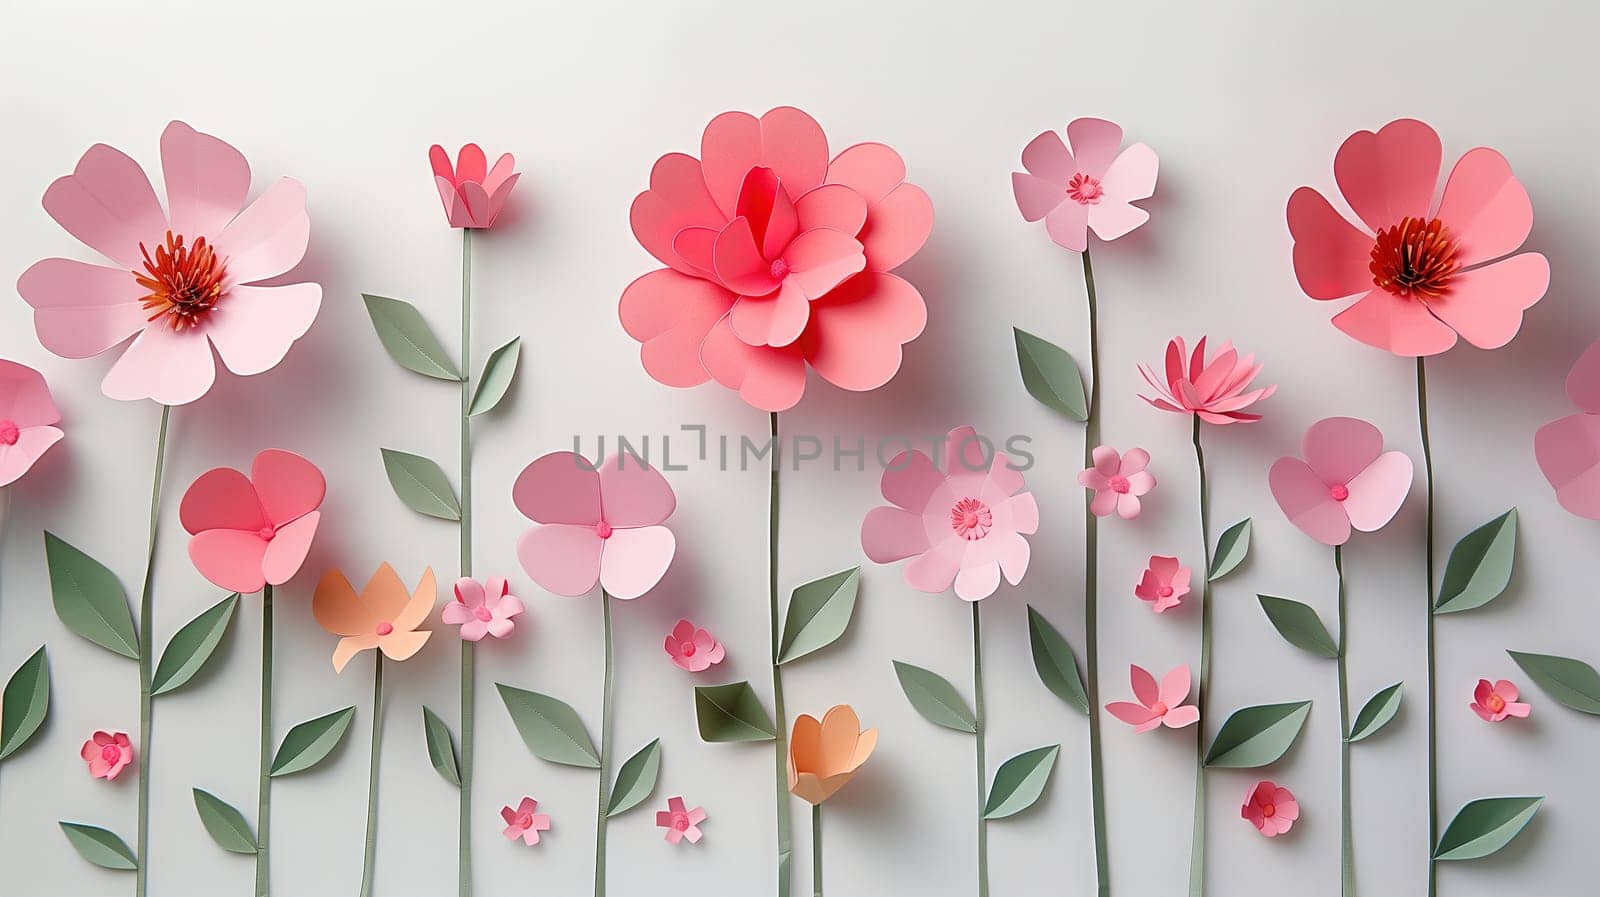 Group of Paper Flowers on White Wall by TRMK